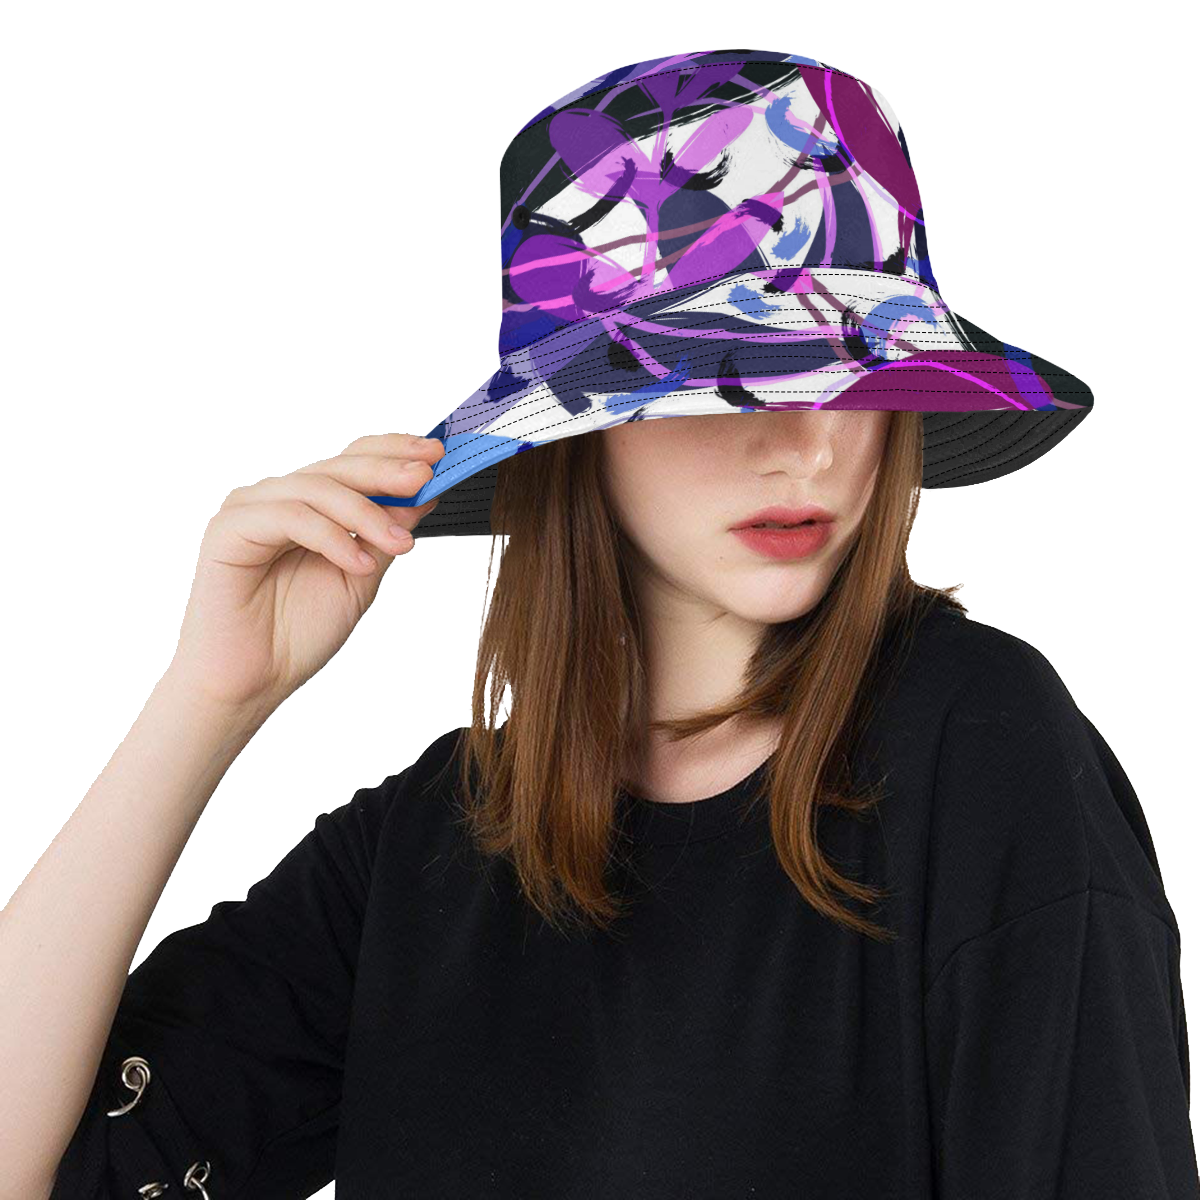 Fun Messy Abstract All Over Print Bucket Hat